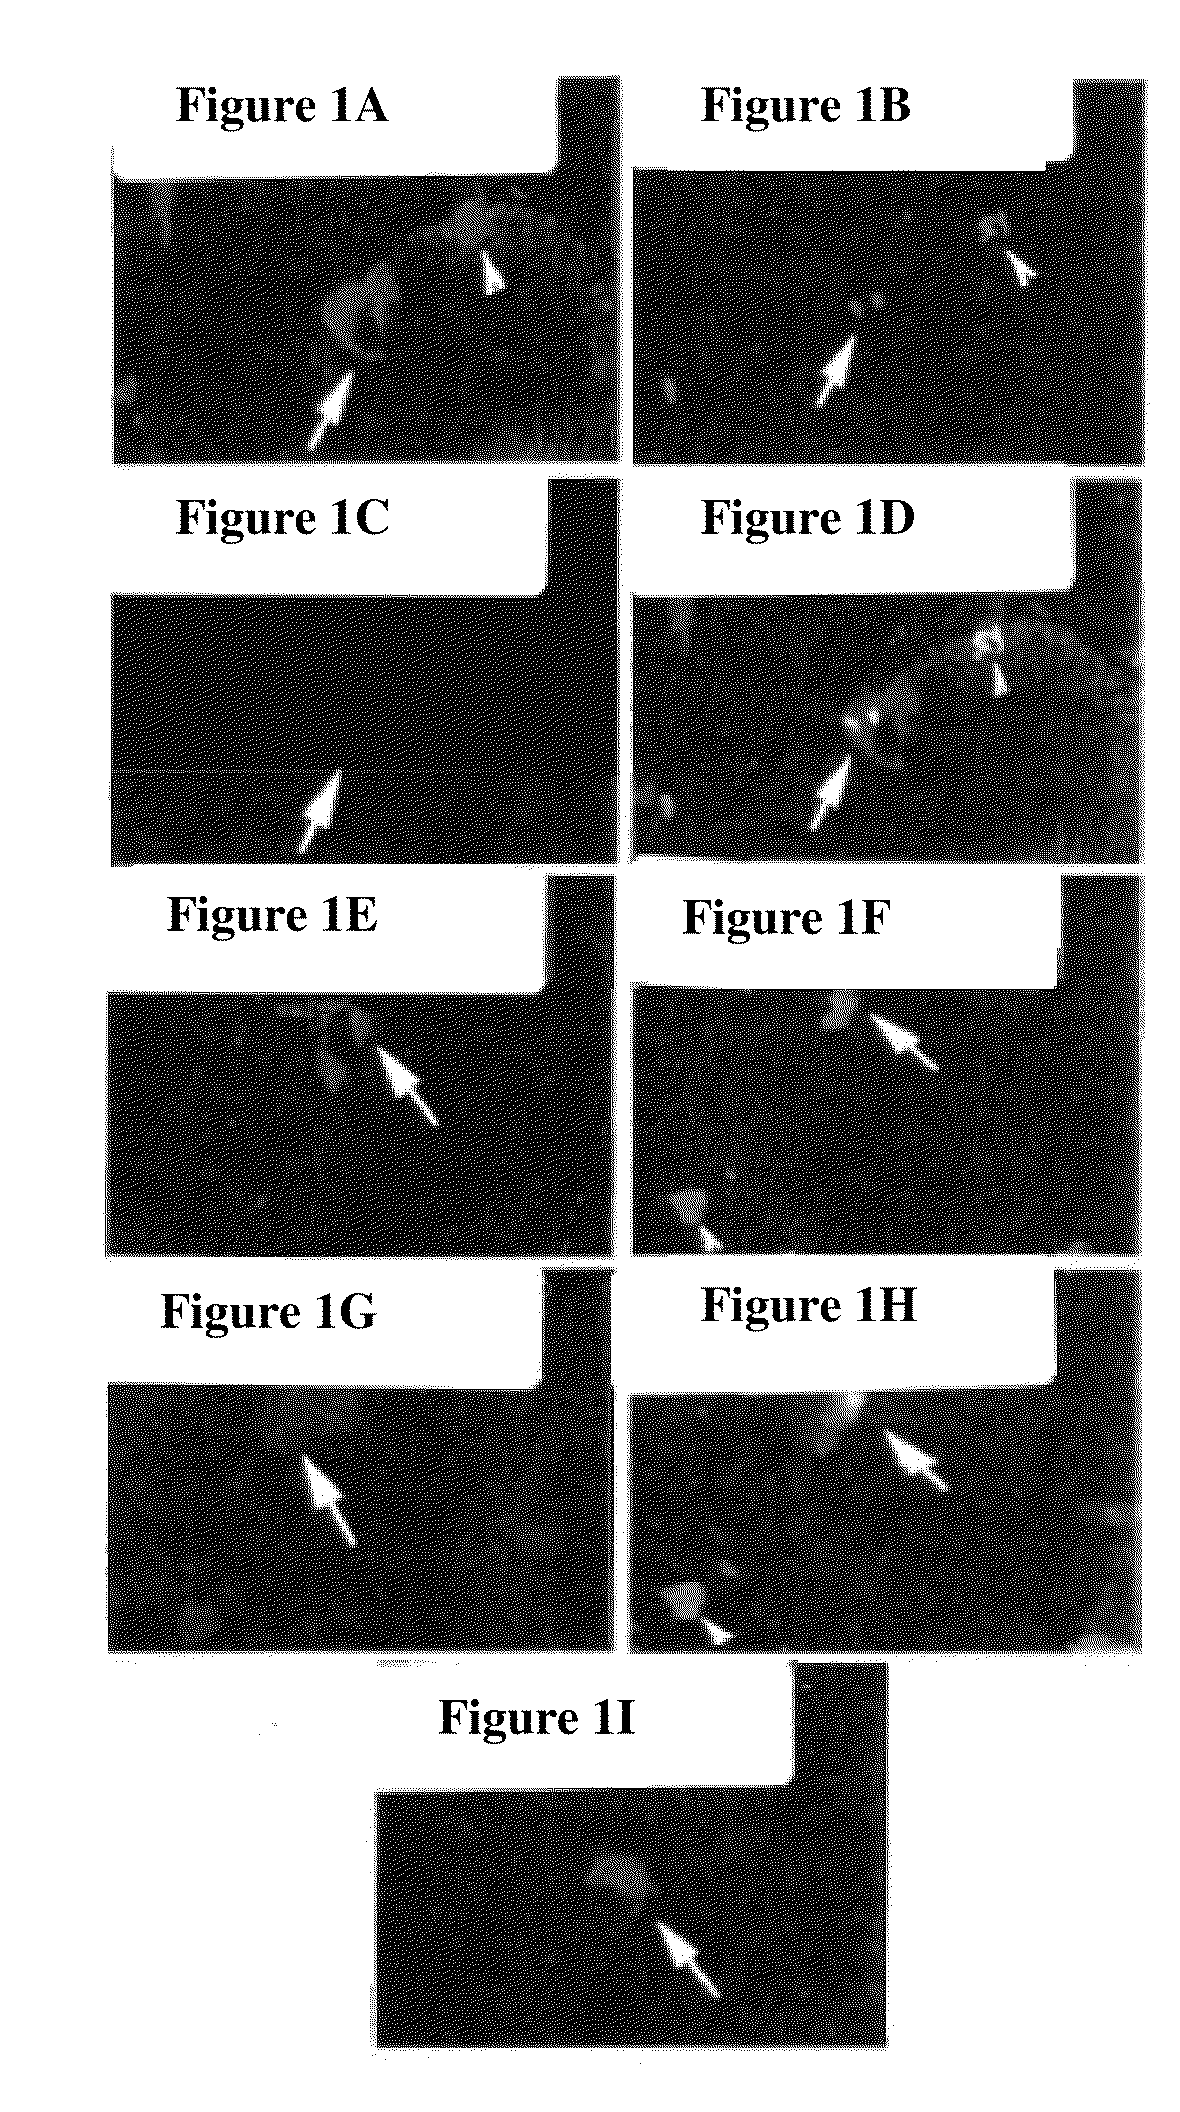 Bone augmentation utilizing muscle-derived progenitor compositions, and treatments thereof